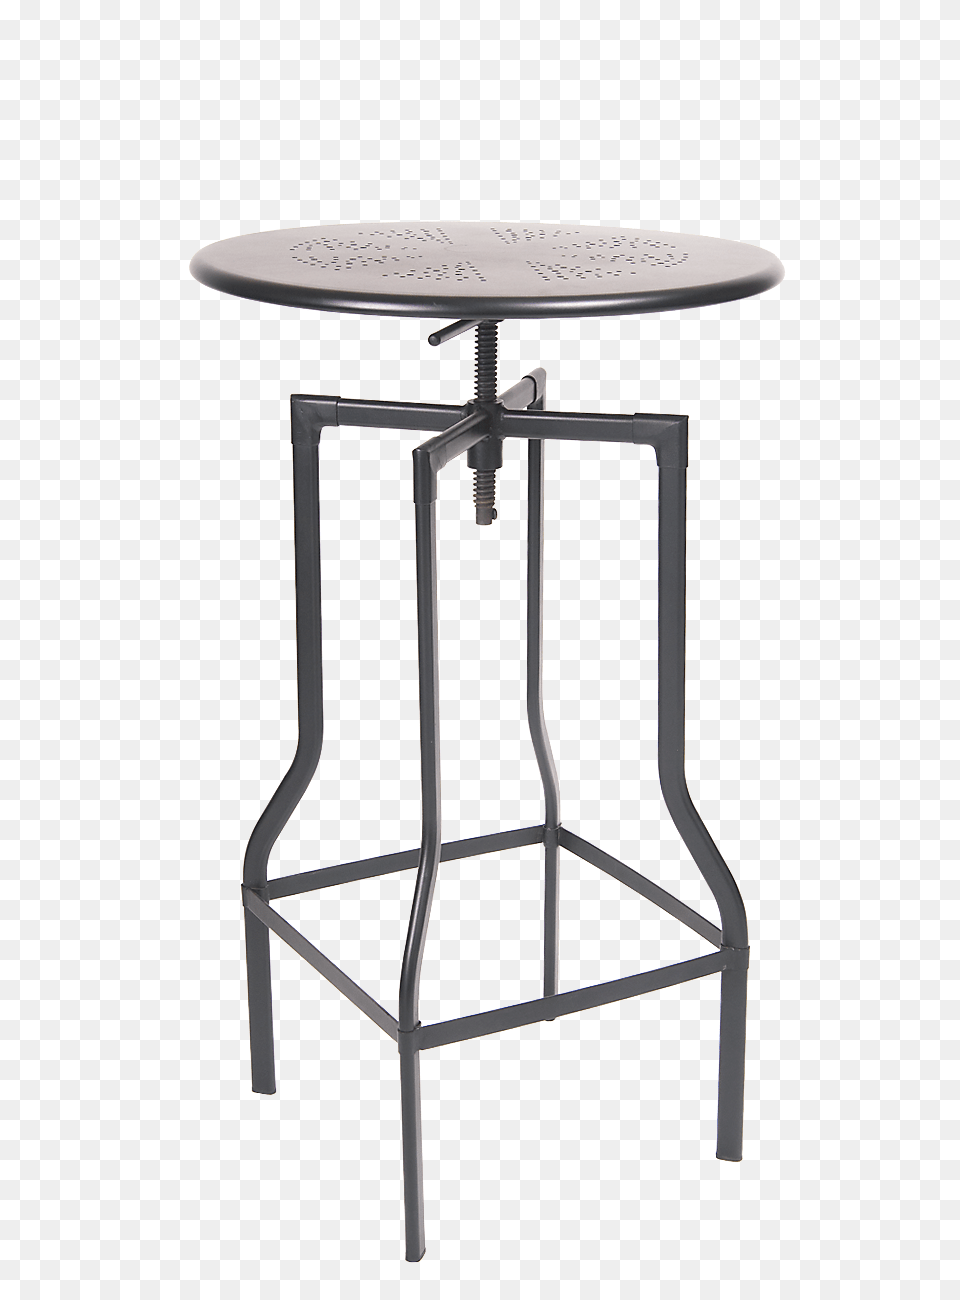 Round Indoor Steel Table In Black Finish, Coffee Table, Desk, Dining Table, Furniture Free Png